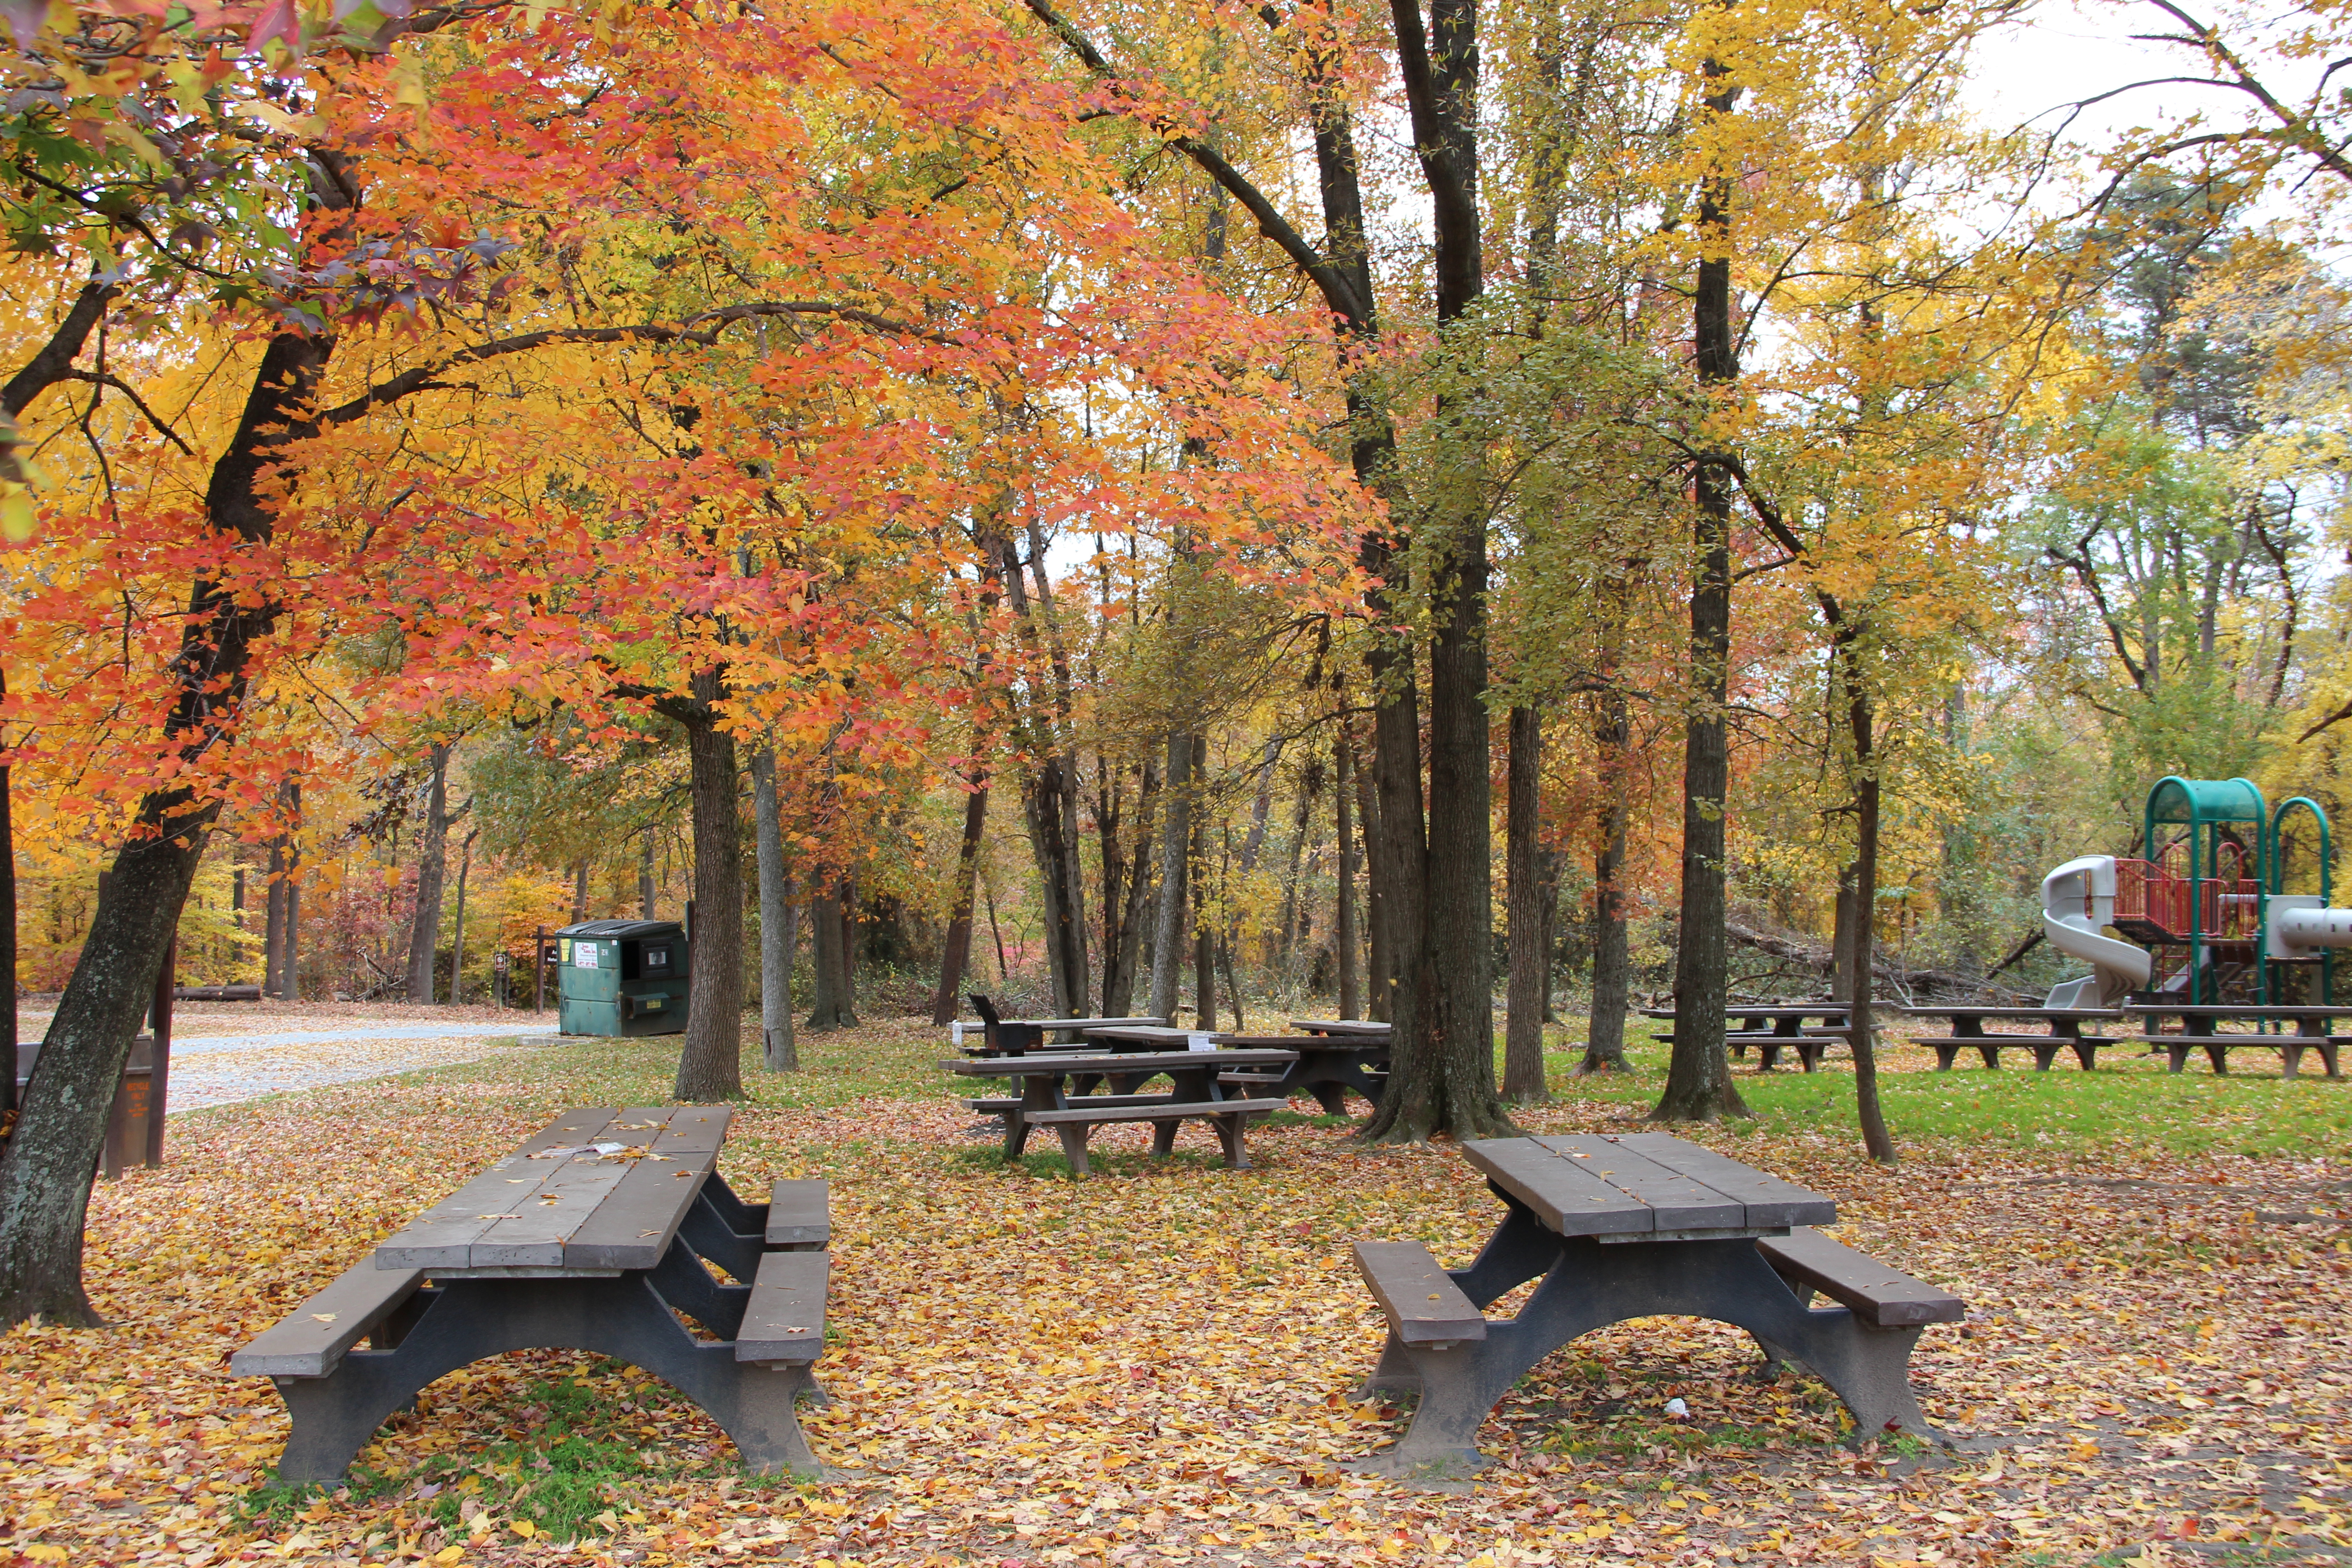 Fall Colors in the Sweetgum Picnic Area, Greenbelt Park, Maryland